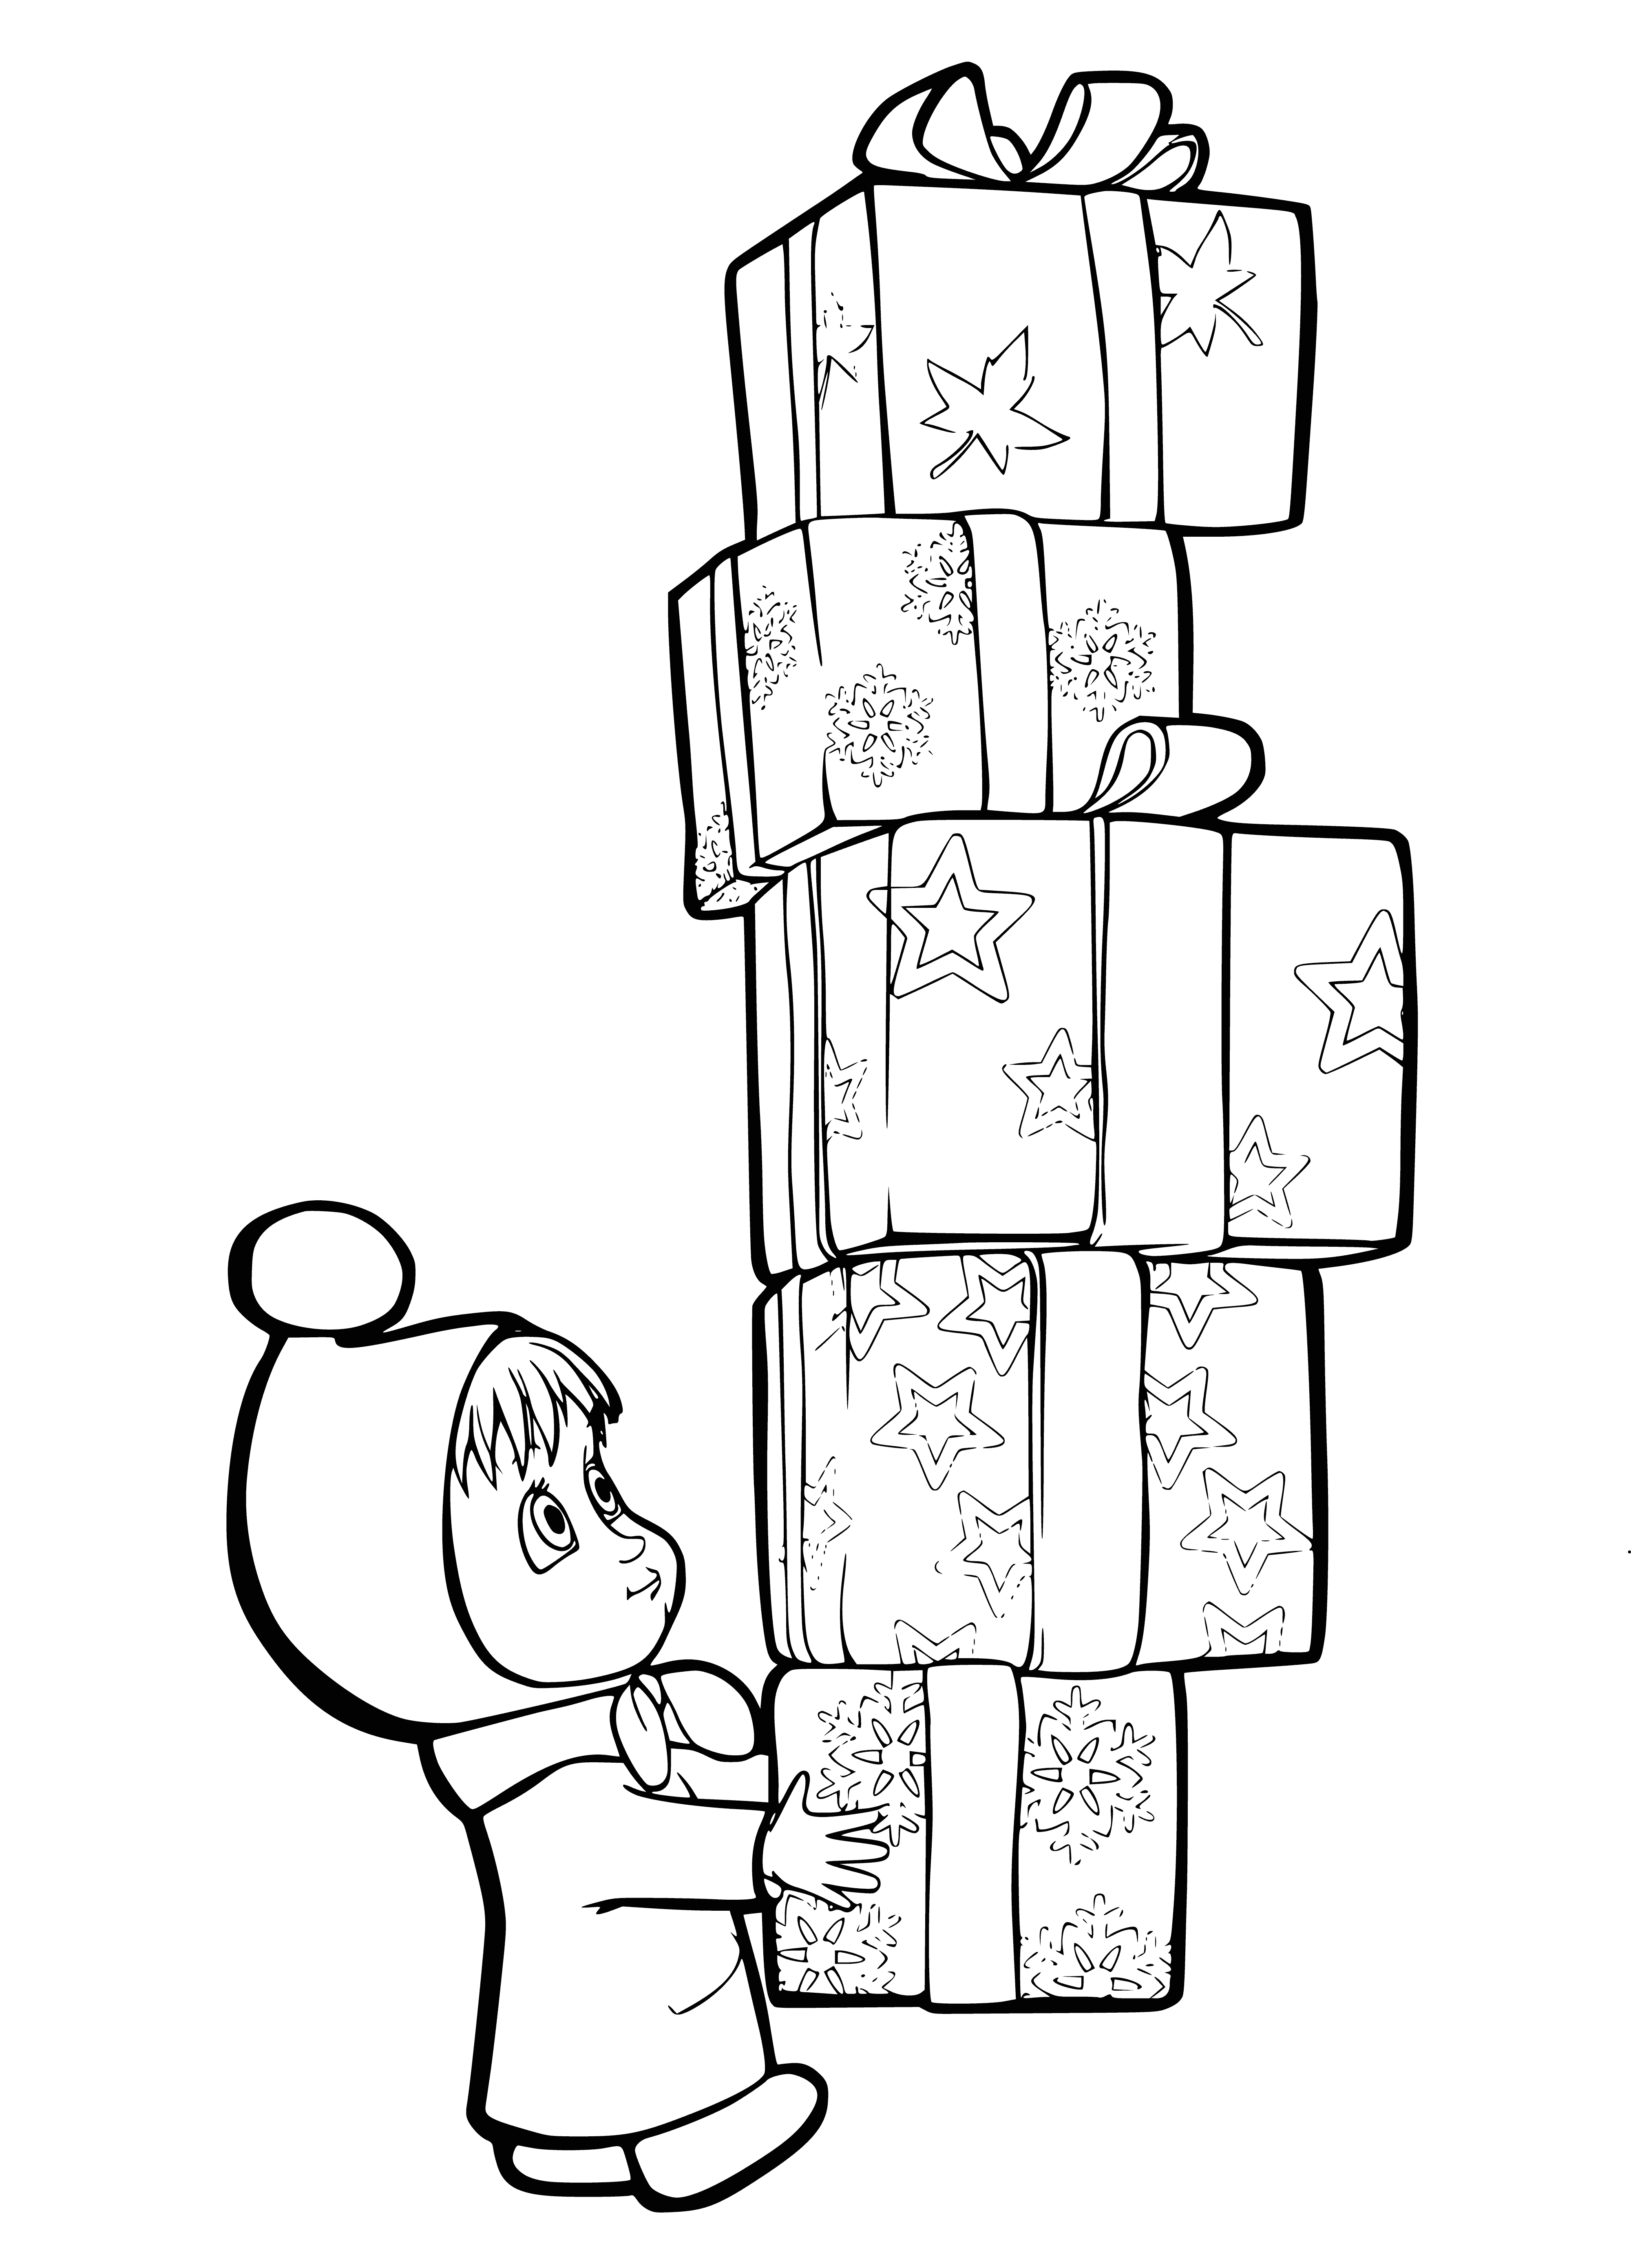 coloring page: Masha grins in delight as she looks at her Christmas presents around the big tree, wrapping paper and bows everywhere!